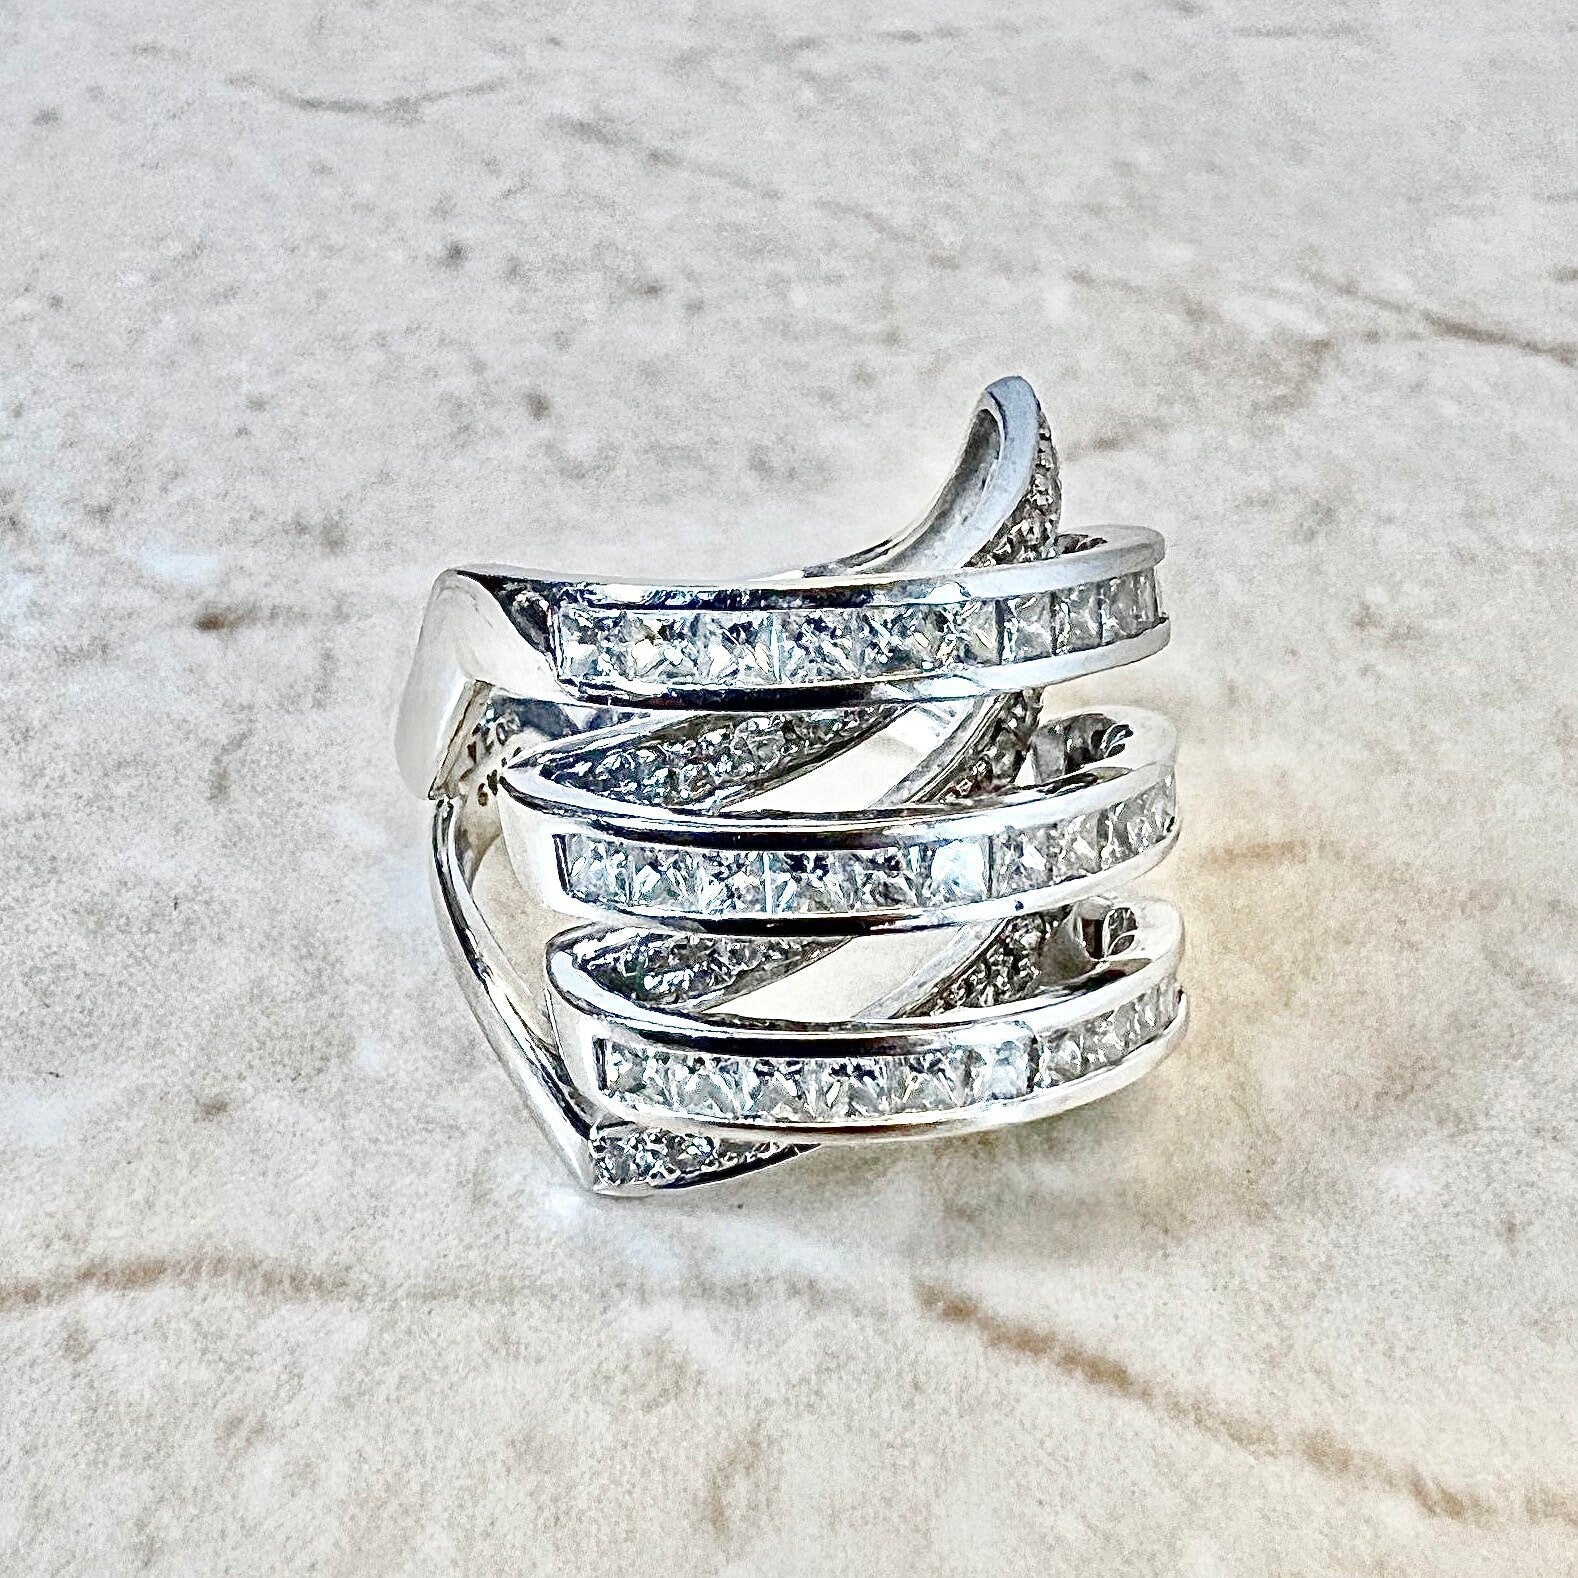 Vintage 18K Diamond Crossover Band Ring 1.73 CT - White Gold Diamond Ring - Diamond Cocktail Ring - Gold Diamond Band - Anniversary Ring